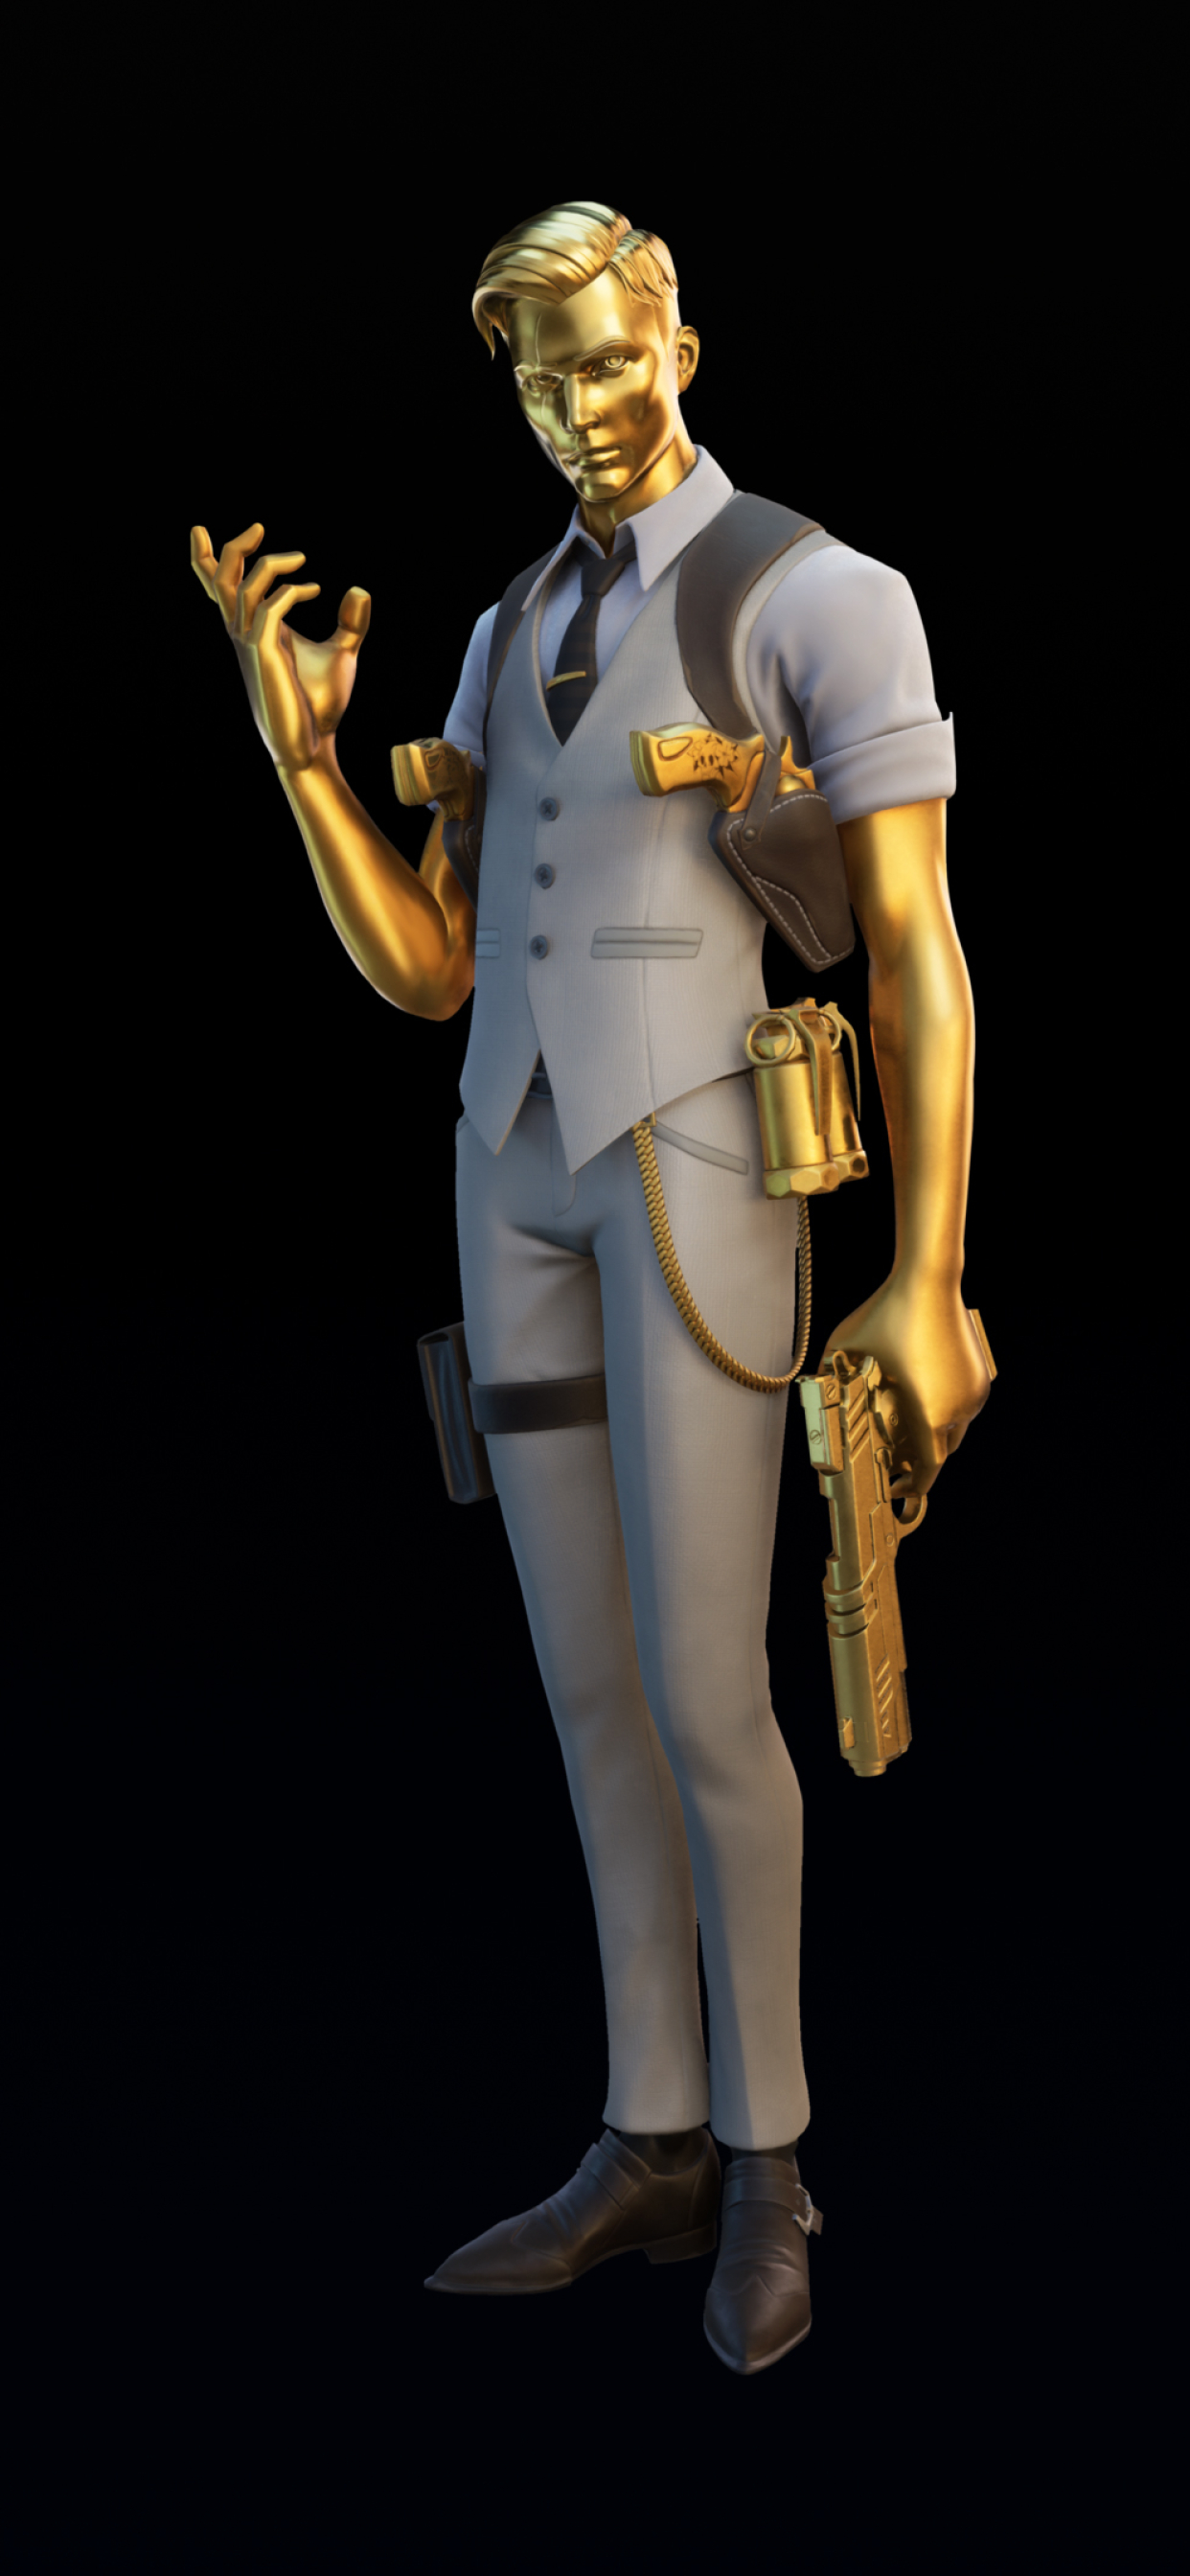 1242x2688-ghost-midas-fortnite-chapter-2-iphone-xs-max-wallpaper-hd